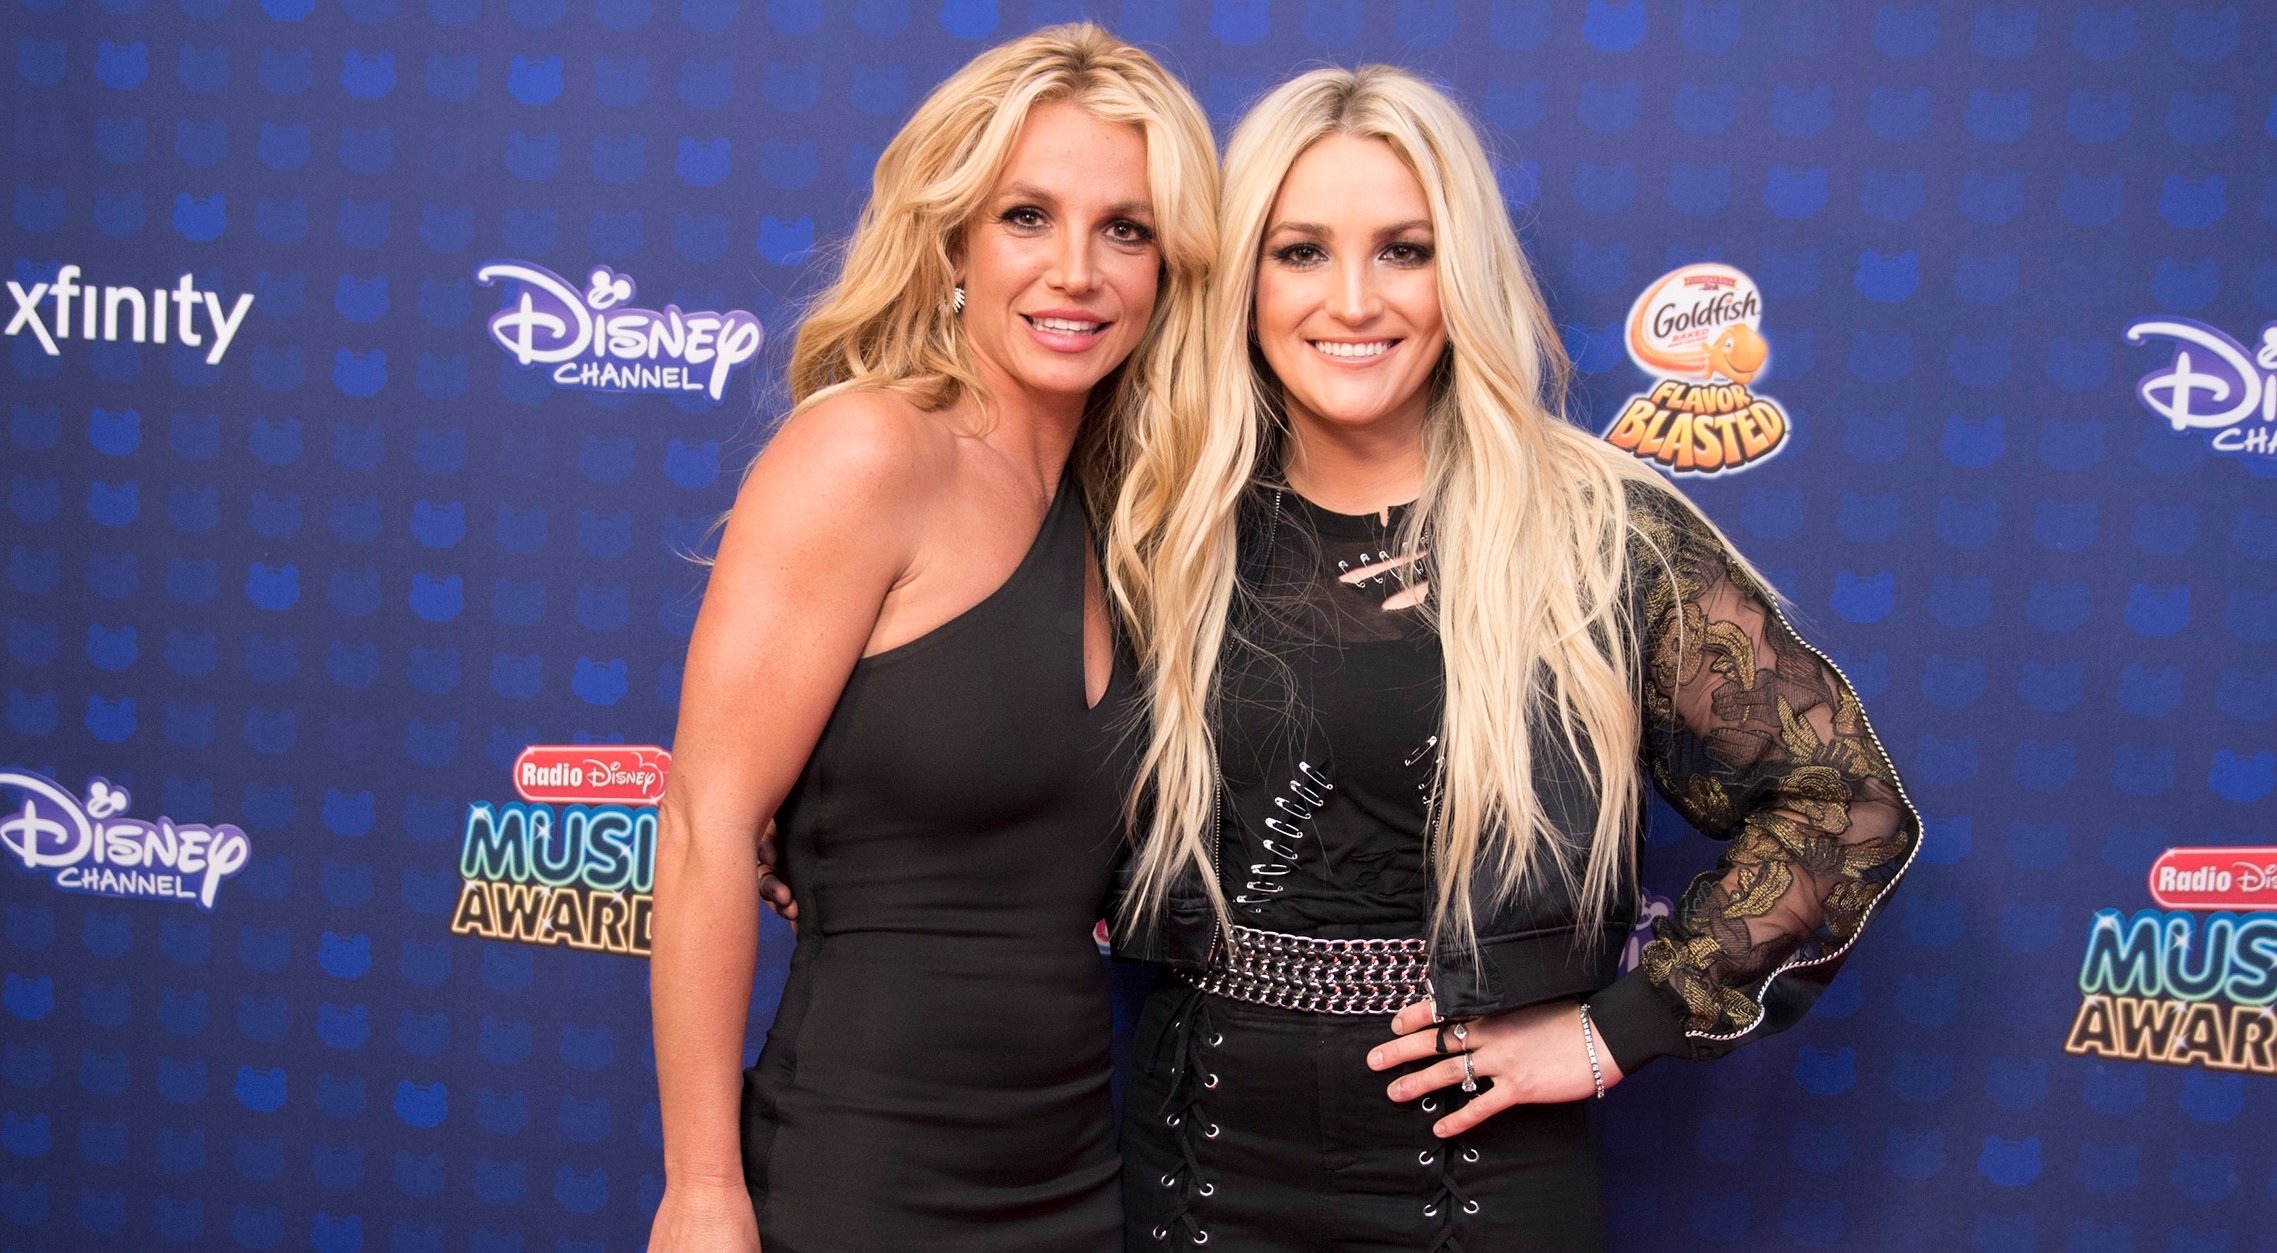 Britney Spears and sister Jamie Lynn Spears smile together at the 2017 Radio Disney Music Awards.